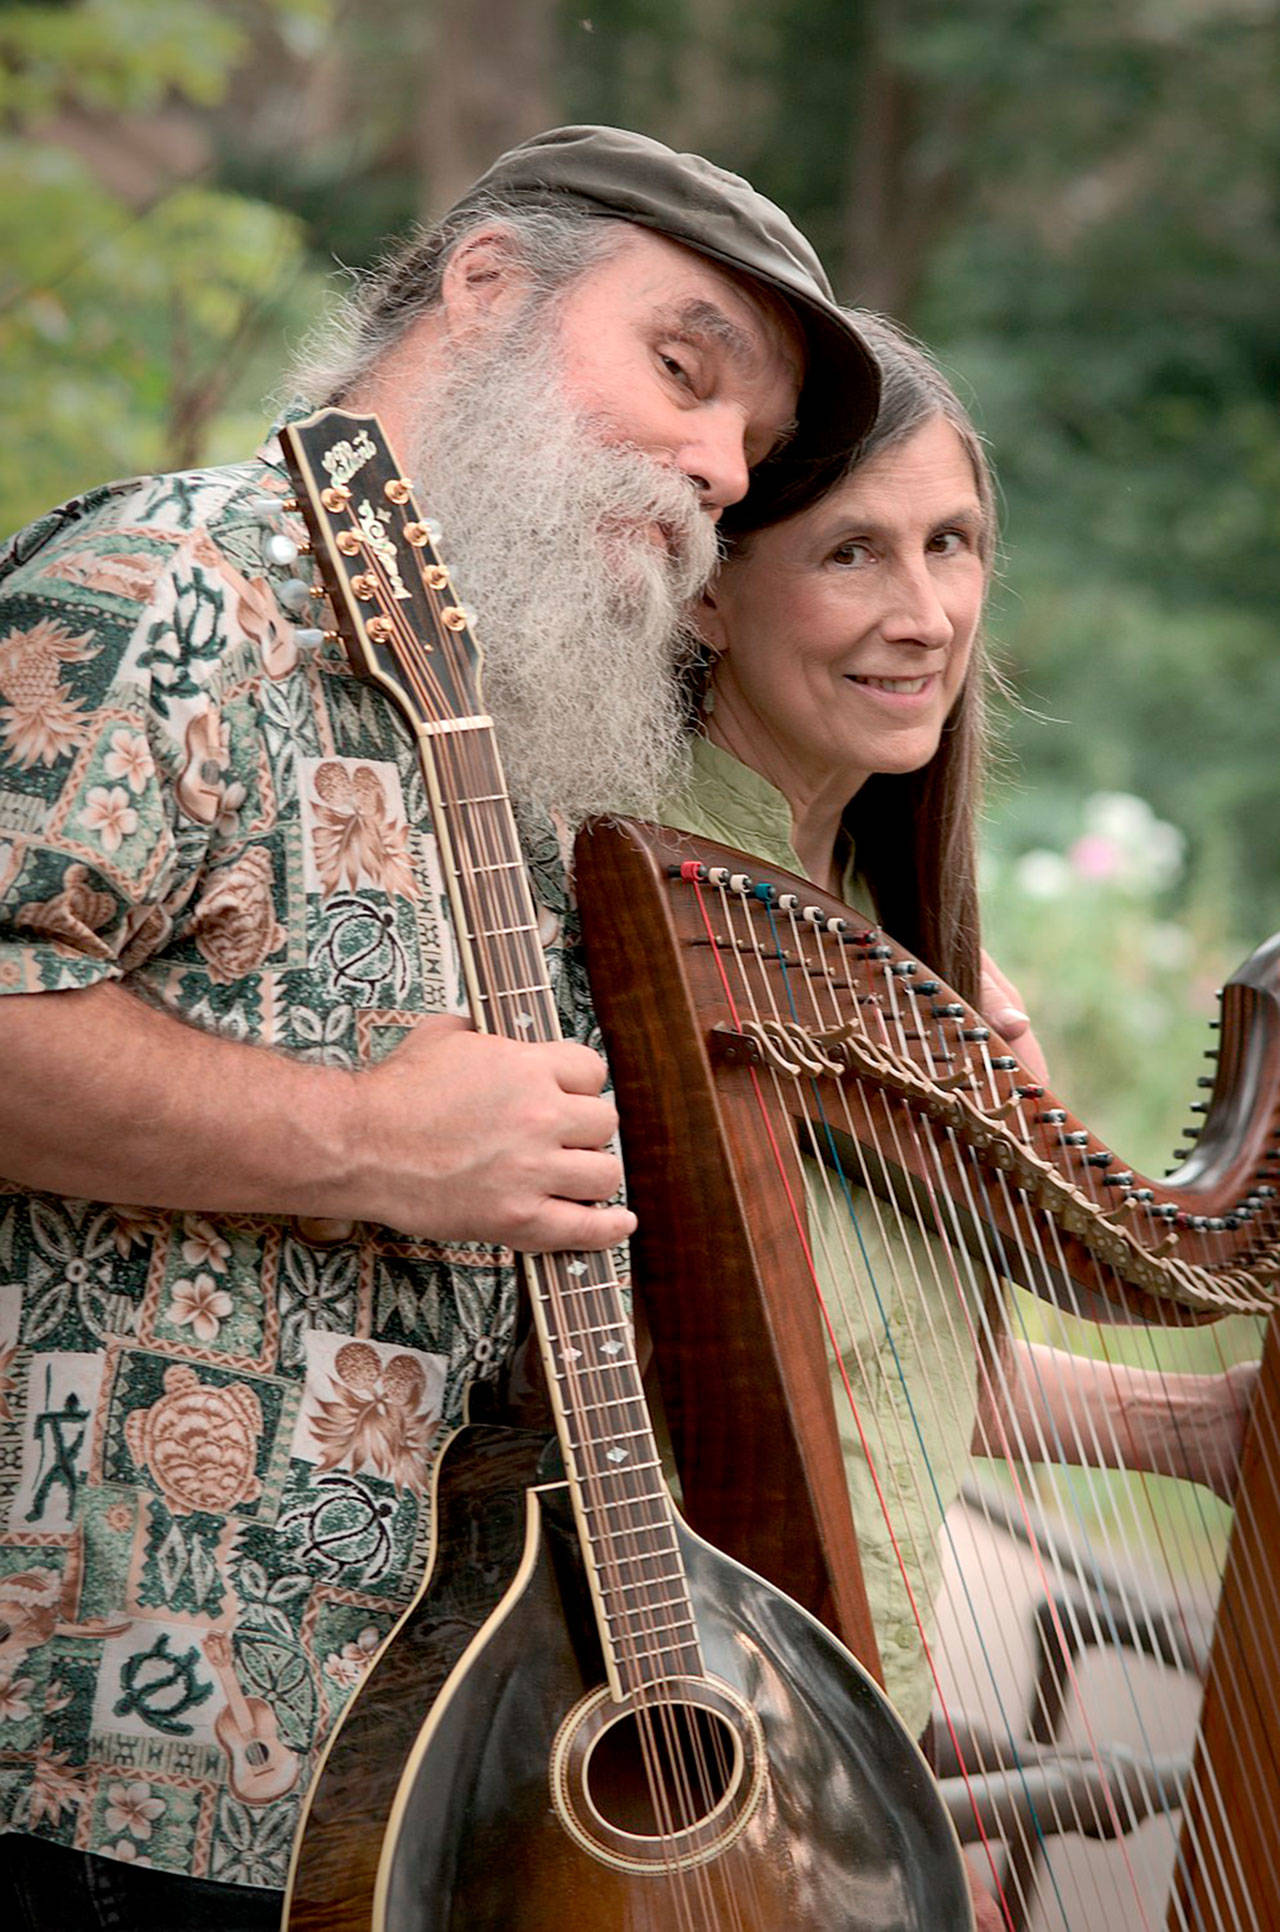 Curtis Teague and Loretta Simonet will perform at Concerts in the Woods in Coyle on Saturday.